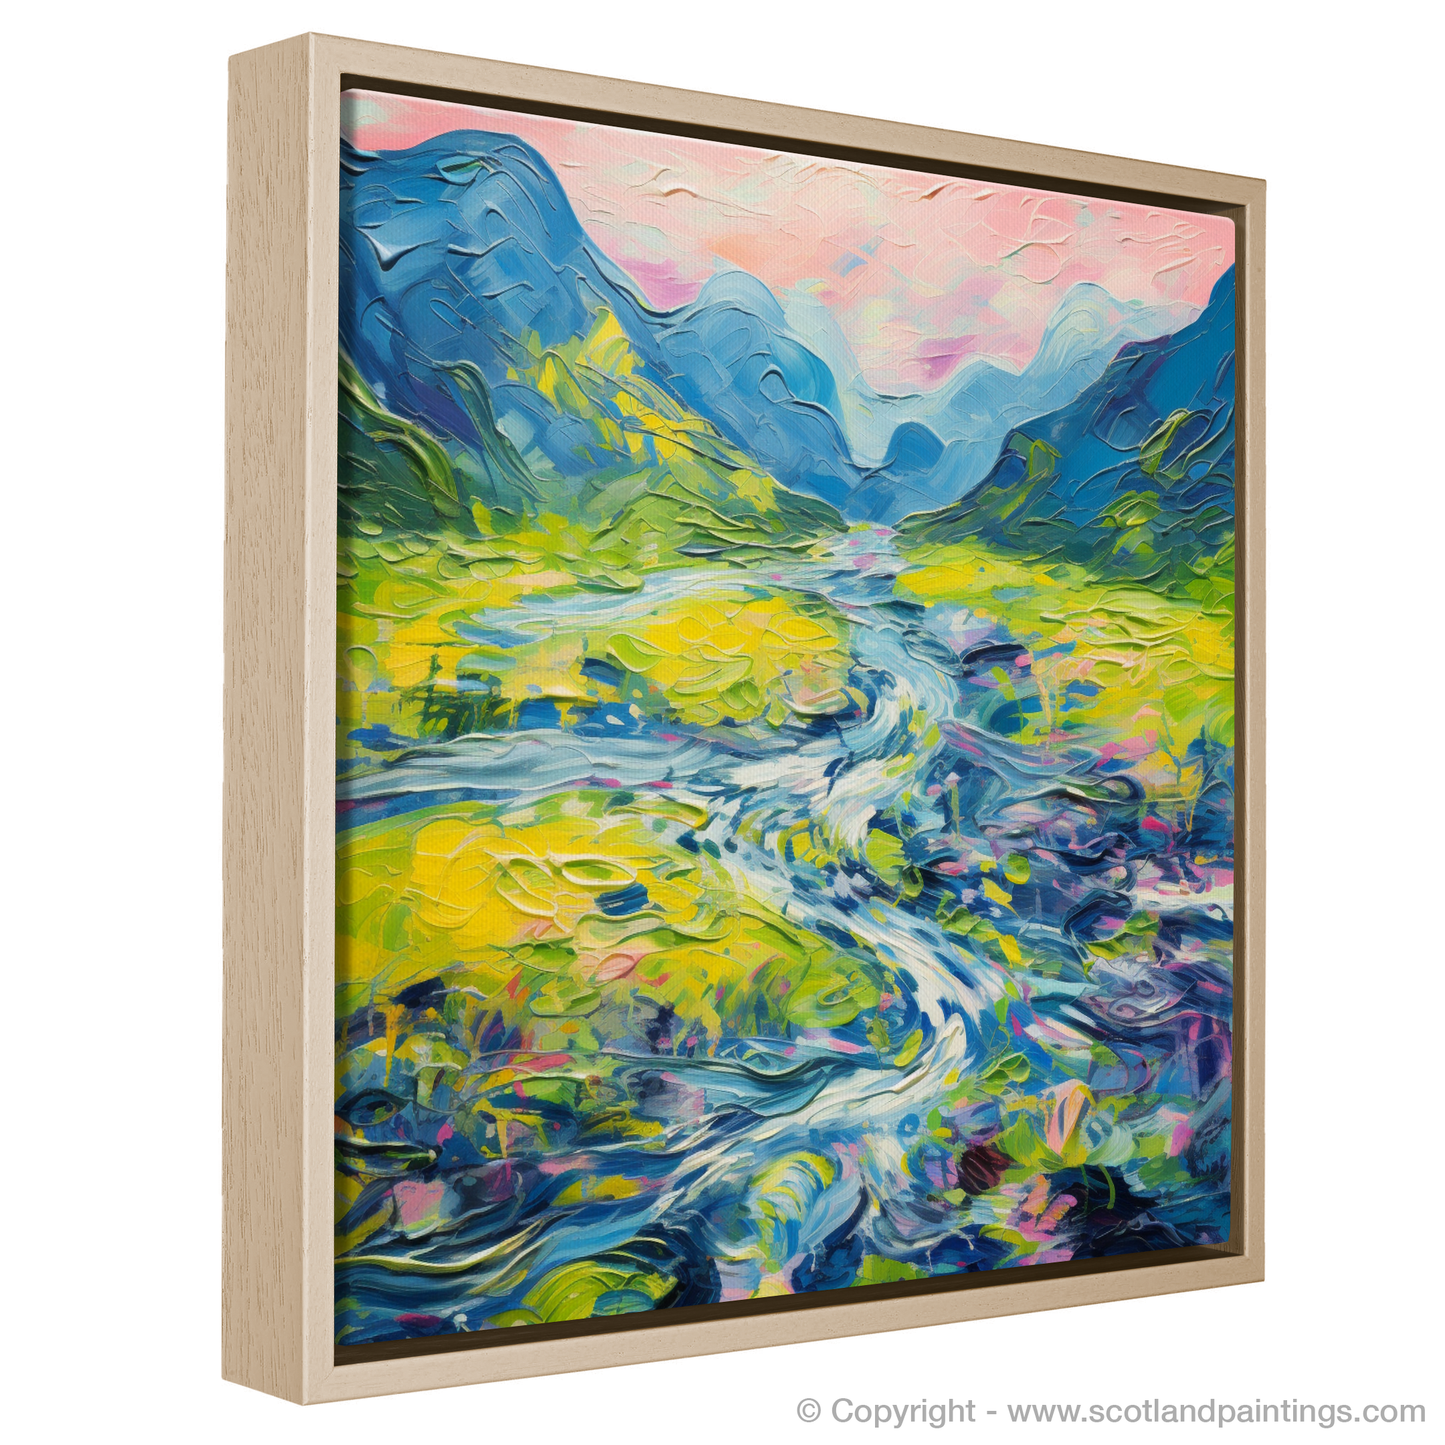 Painting and Art Print of River in Glencoe during summer entitled "Summer Rush in Glencoe Valley".